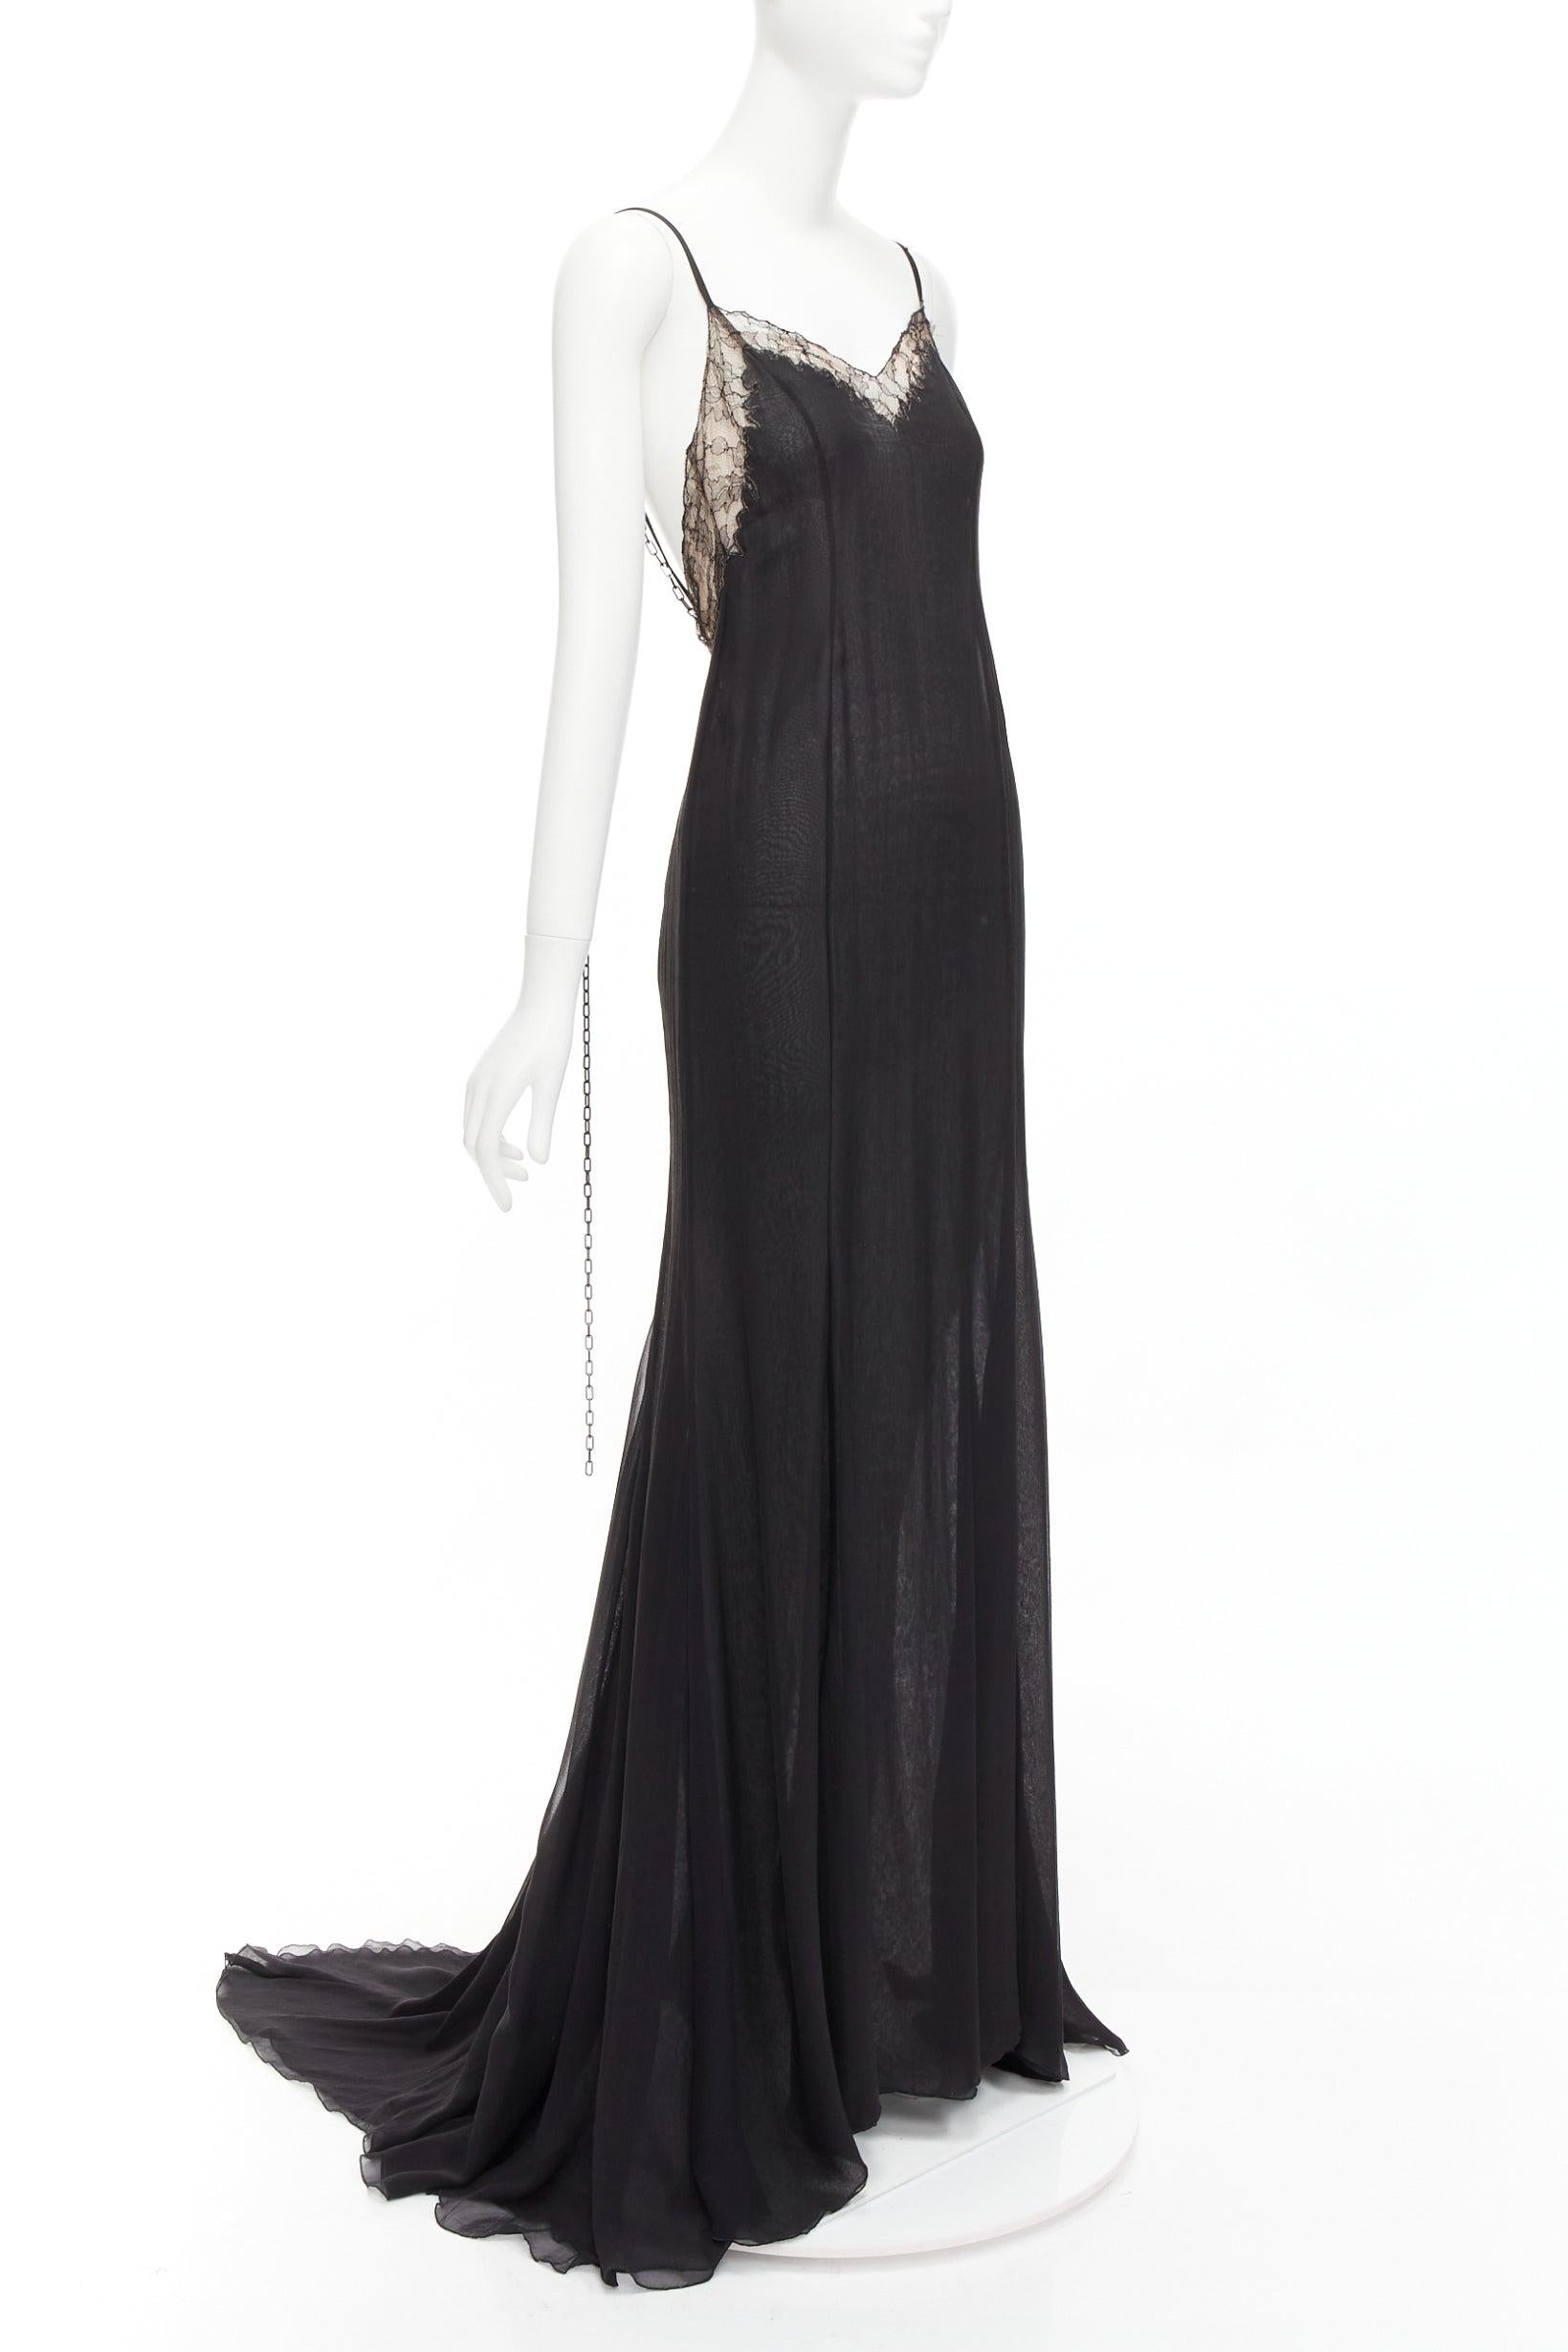 GIANNI VERSACE Vintage black punk chain detail lace trim sheer long gown IT38 XS
Reference: TGAS/D00923
Brand: Gianni Versace
Material: Silk, Blend
Color: Black, Nude
Pattern: Solid
Closure: Zip
Lining: Black Fabric
Extra Details: Side zip. Double